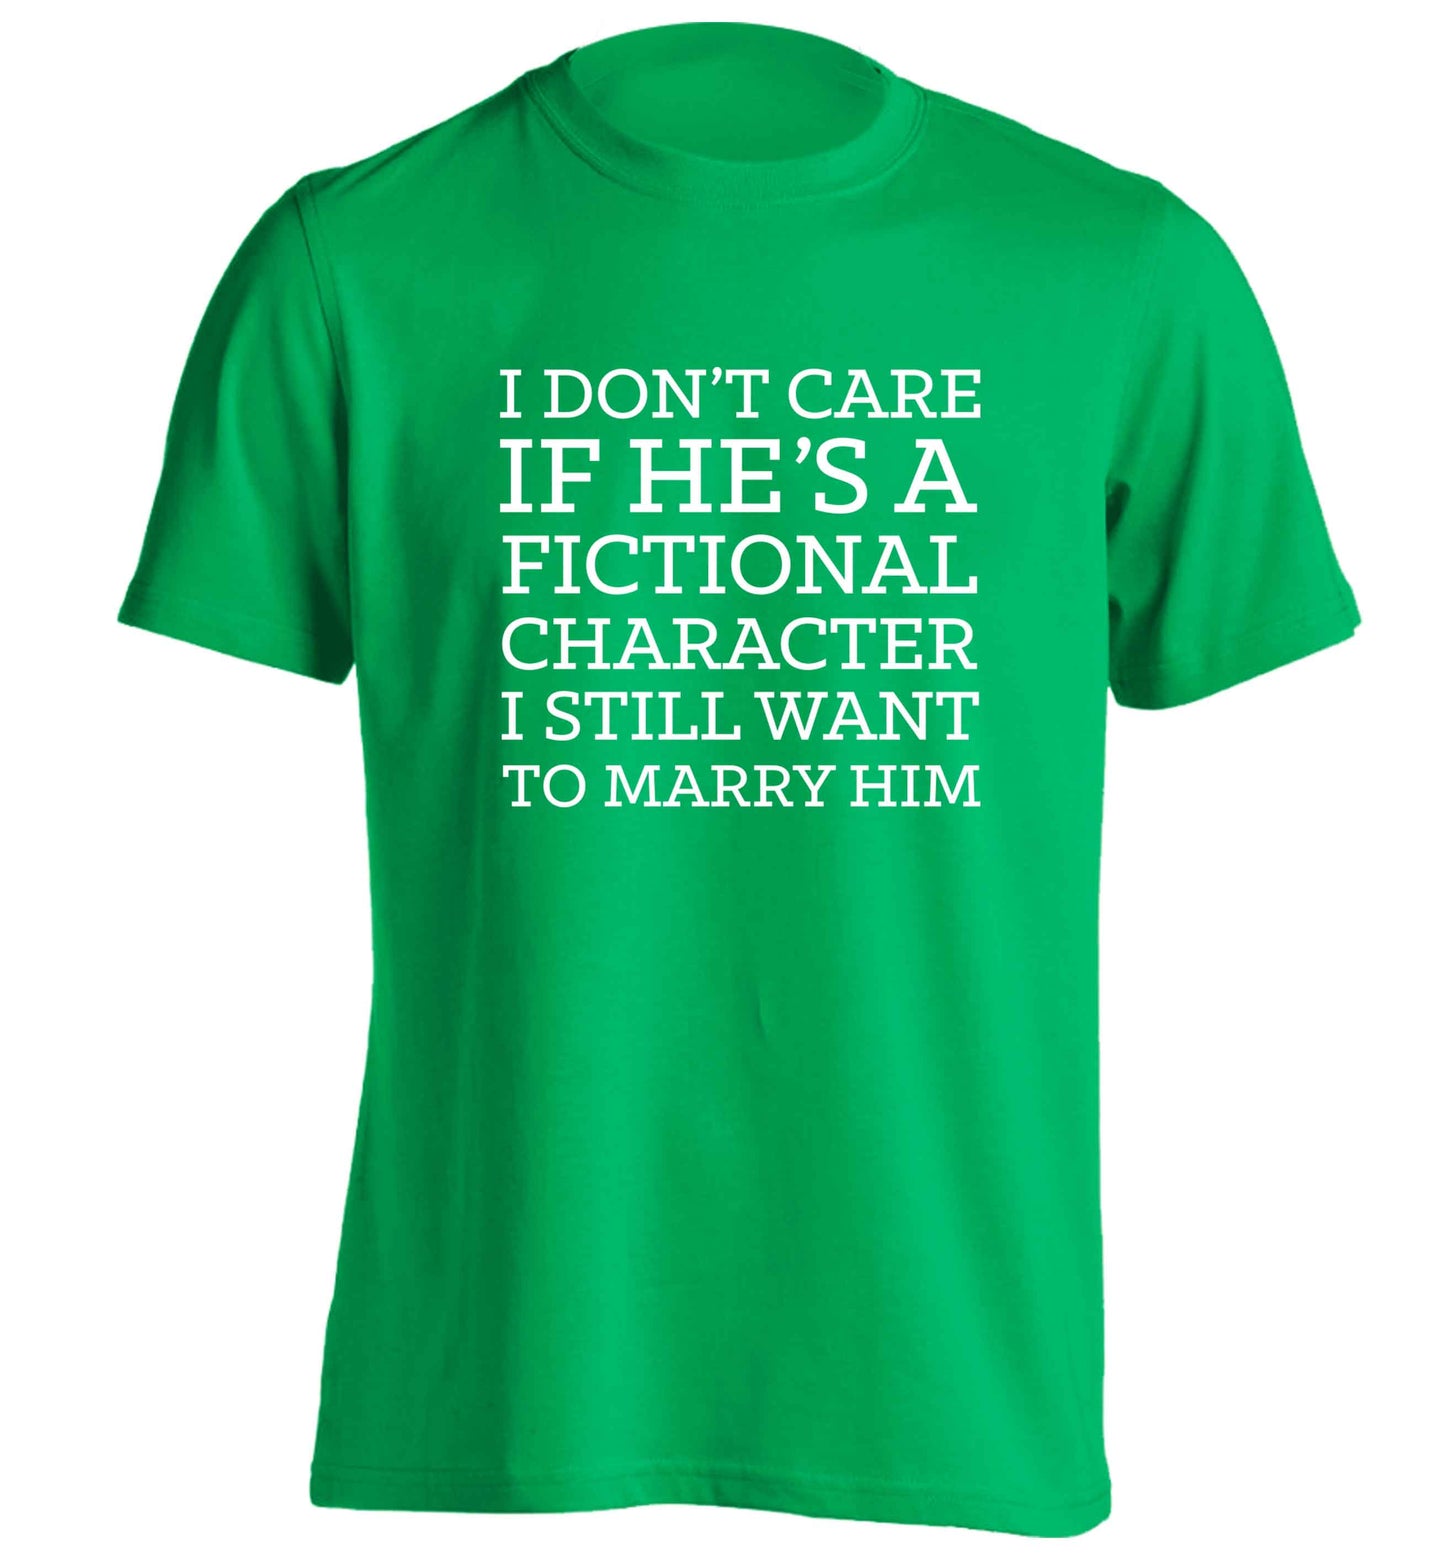 I don't care if he's a fictional character I still want to marry him adults unisex green Tshirt 2XL